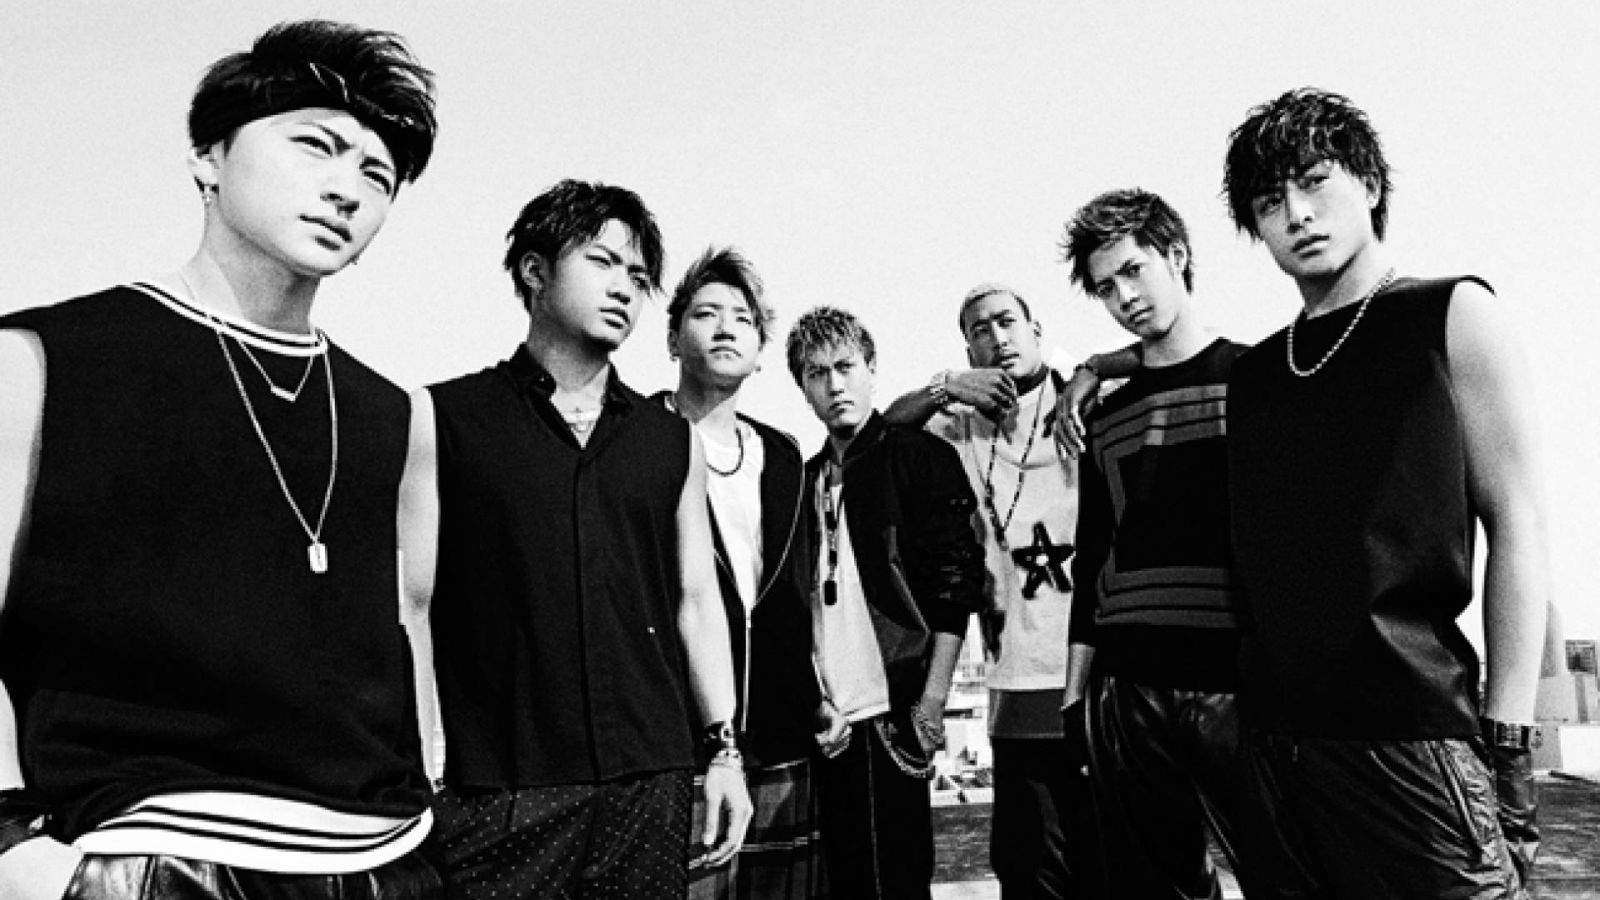 GENERATIONS from EXILE TRIBE lanzará un nuevo single © 2015 avex music creative Inc. All rights reserved.